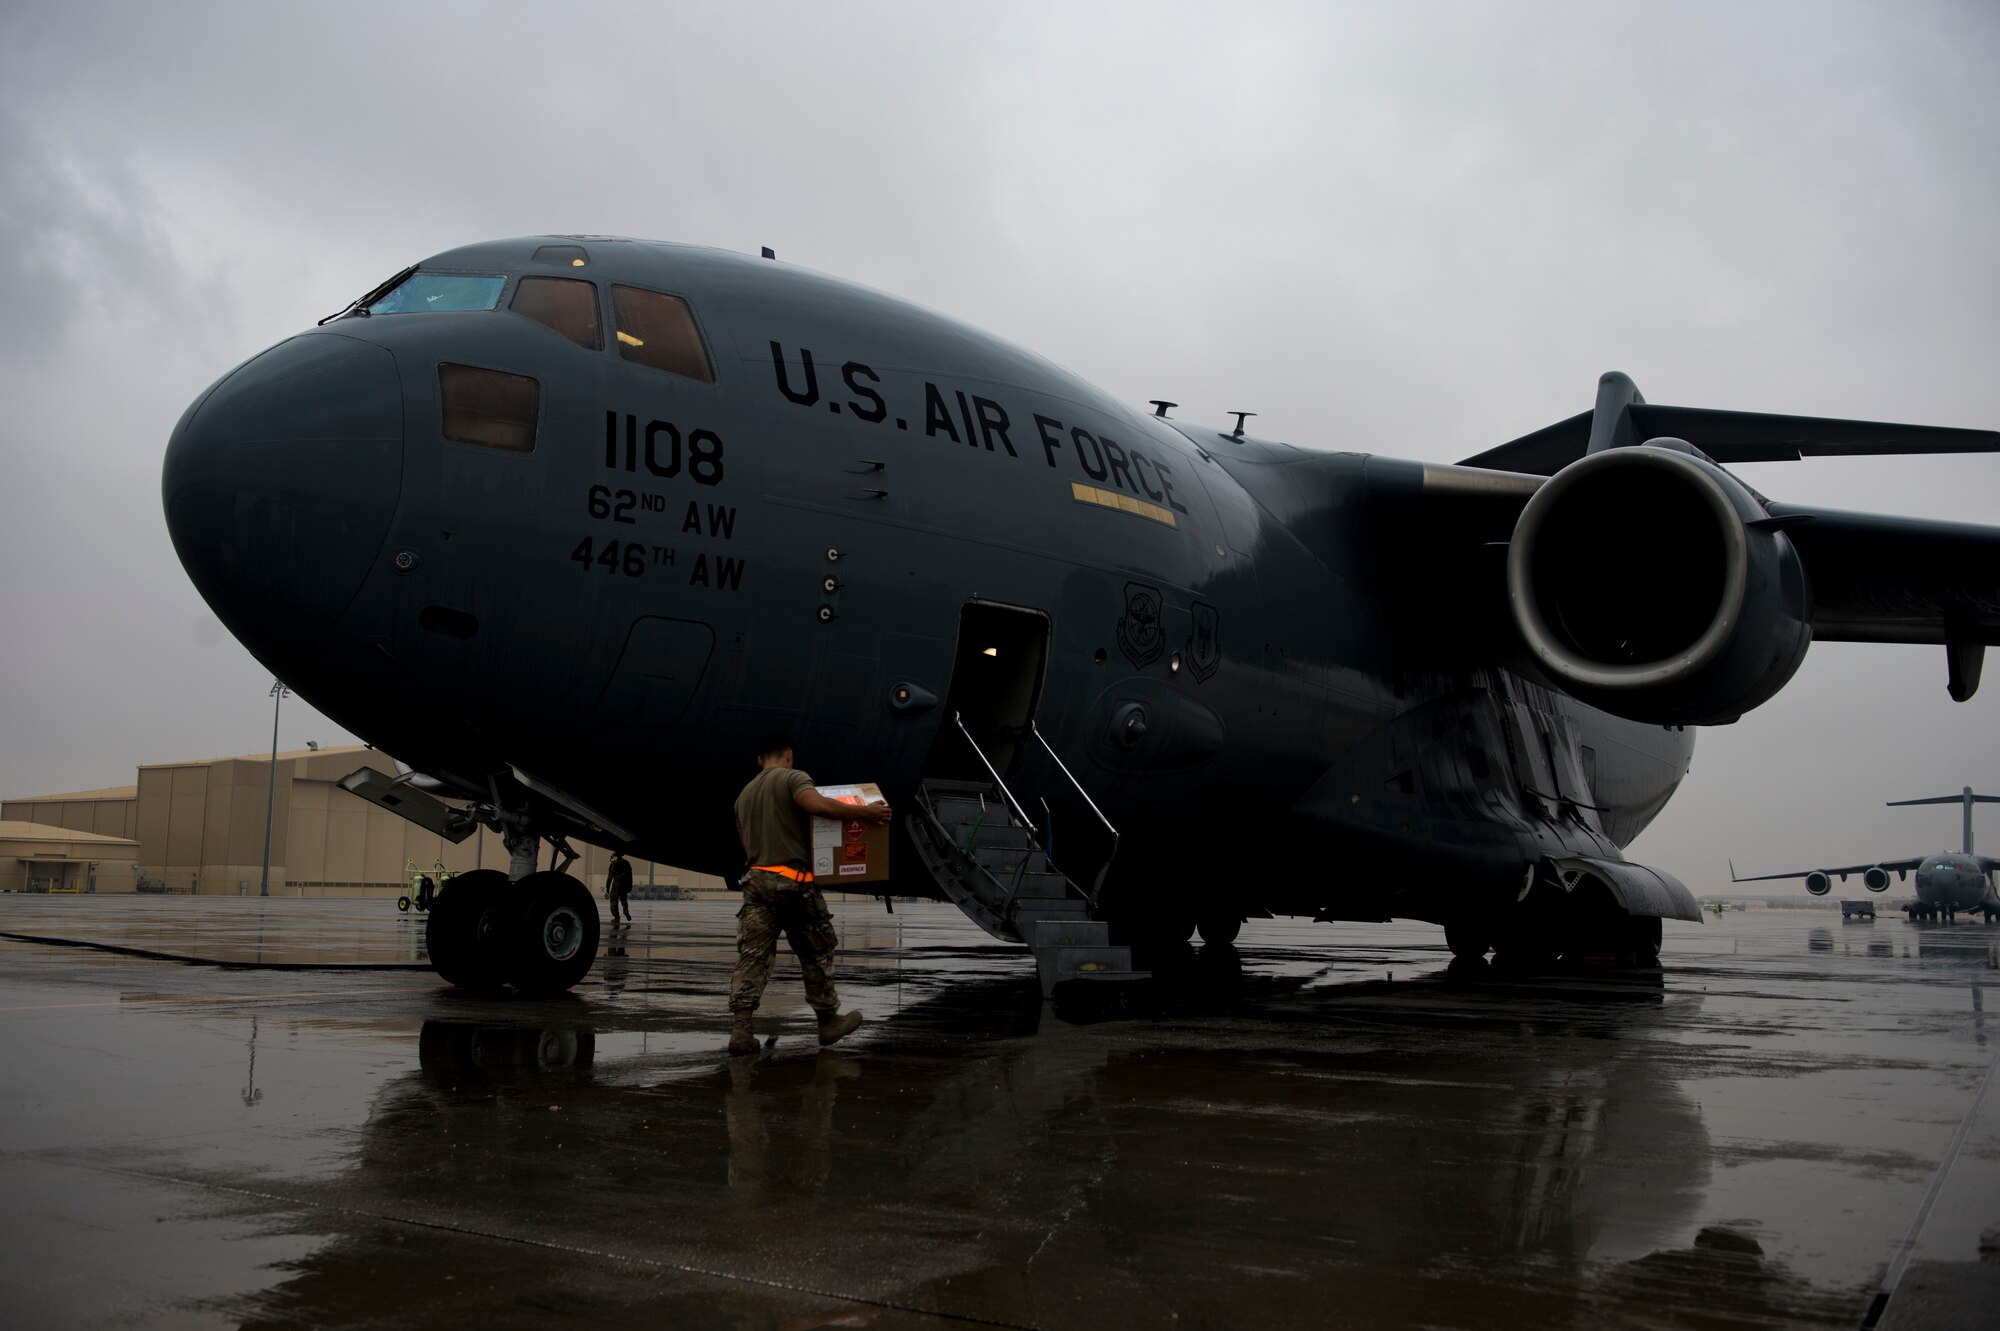 A U.S. Air Force aerial porter assigned to the 746th Expeditionary Logistics Readiness Squadron loads cargo on to a C-17 Globemaster III at Al Udeid Air Base, Qatar, Jan. 10, 2020.